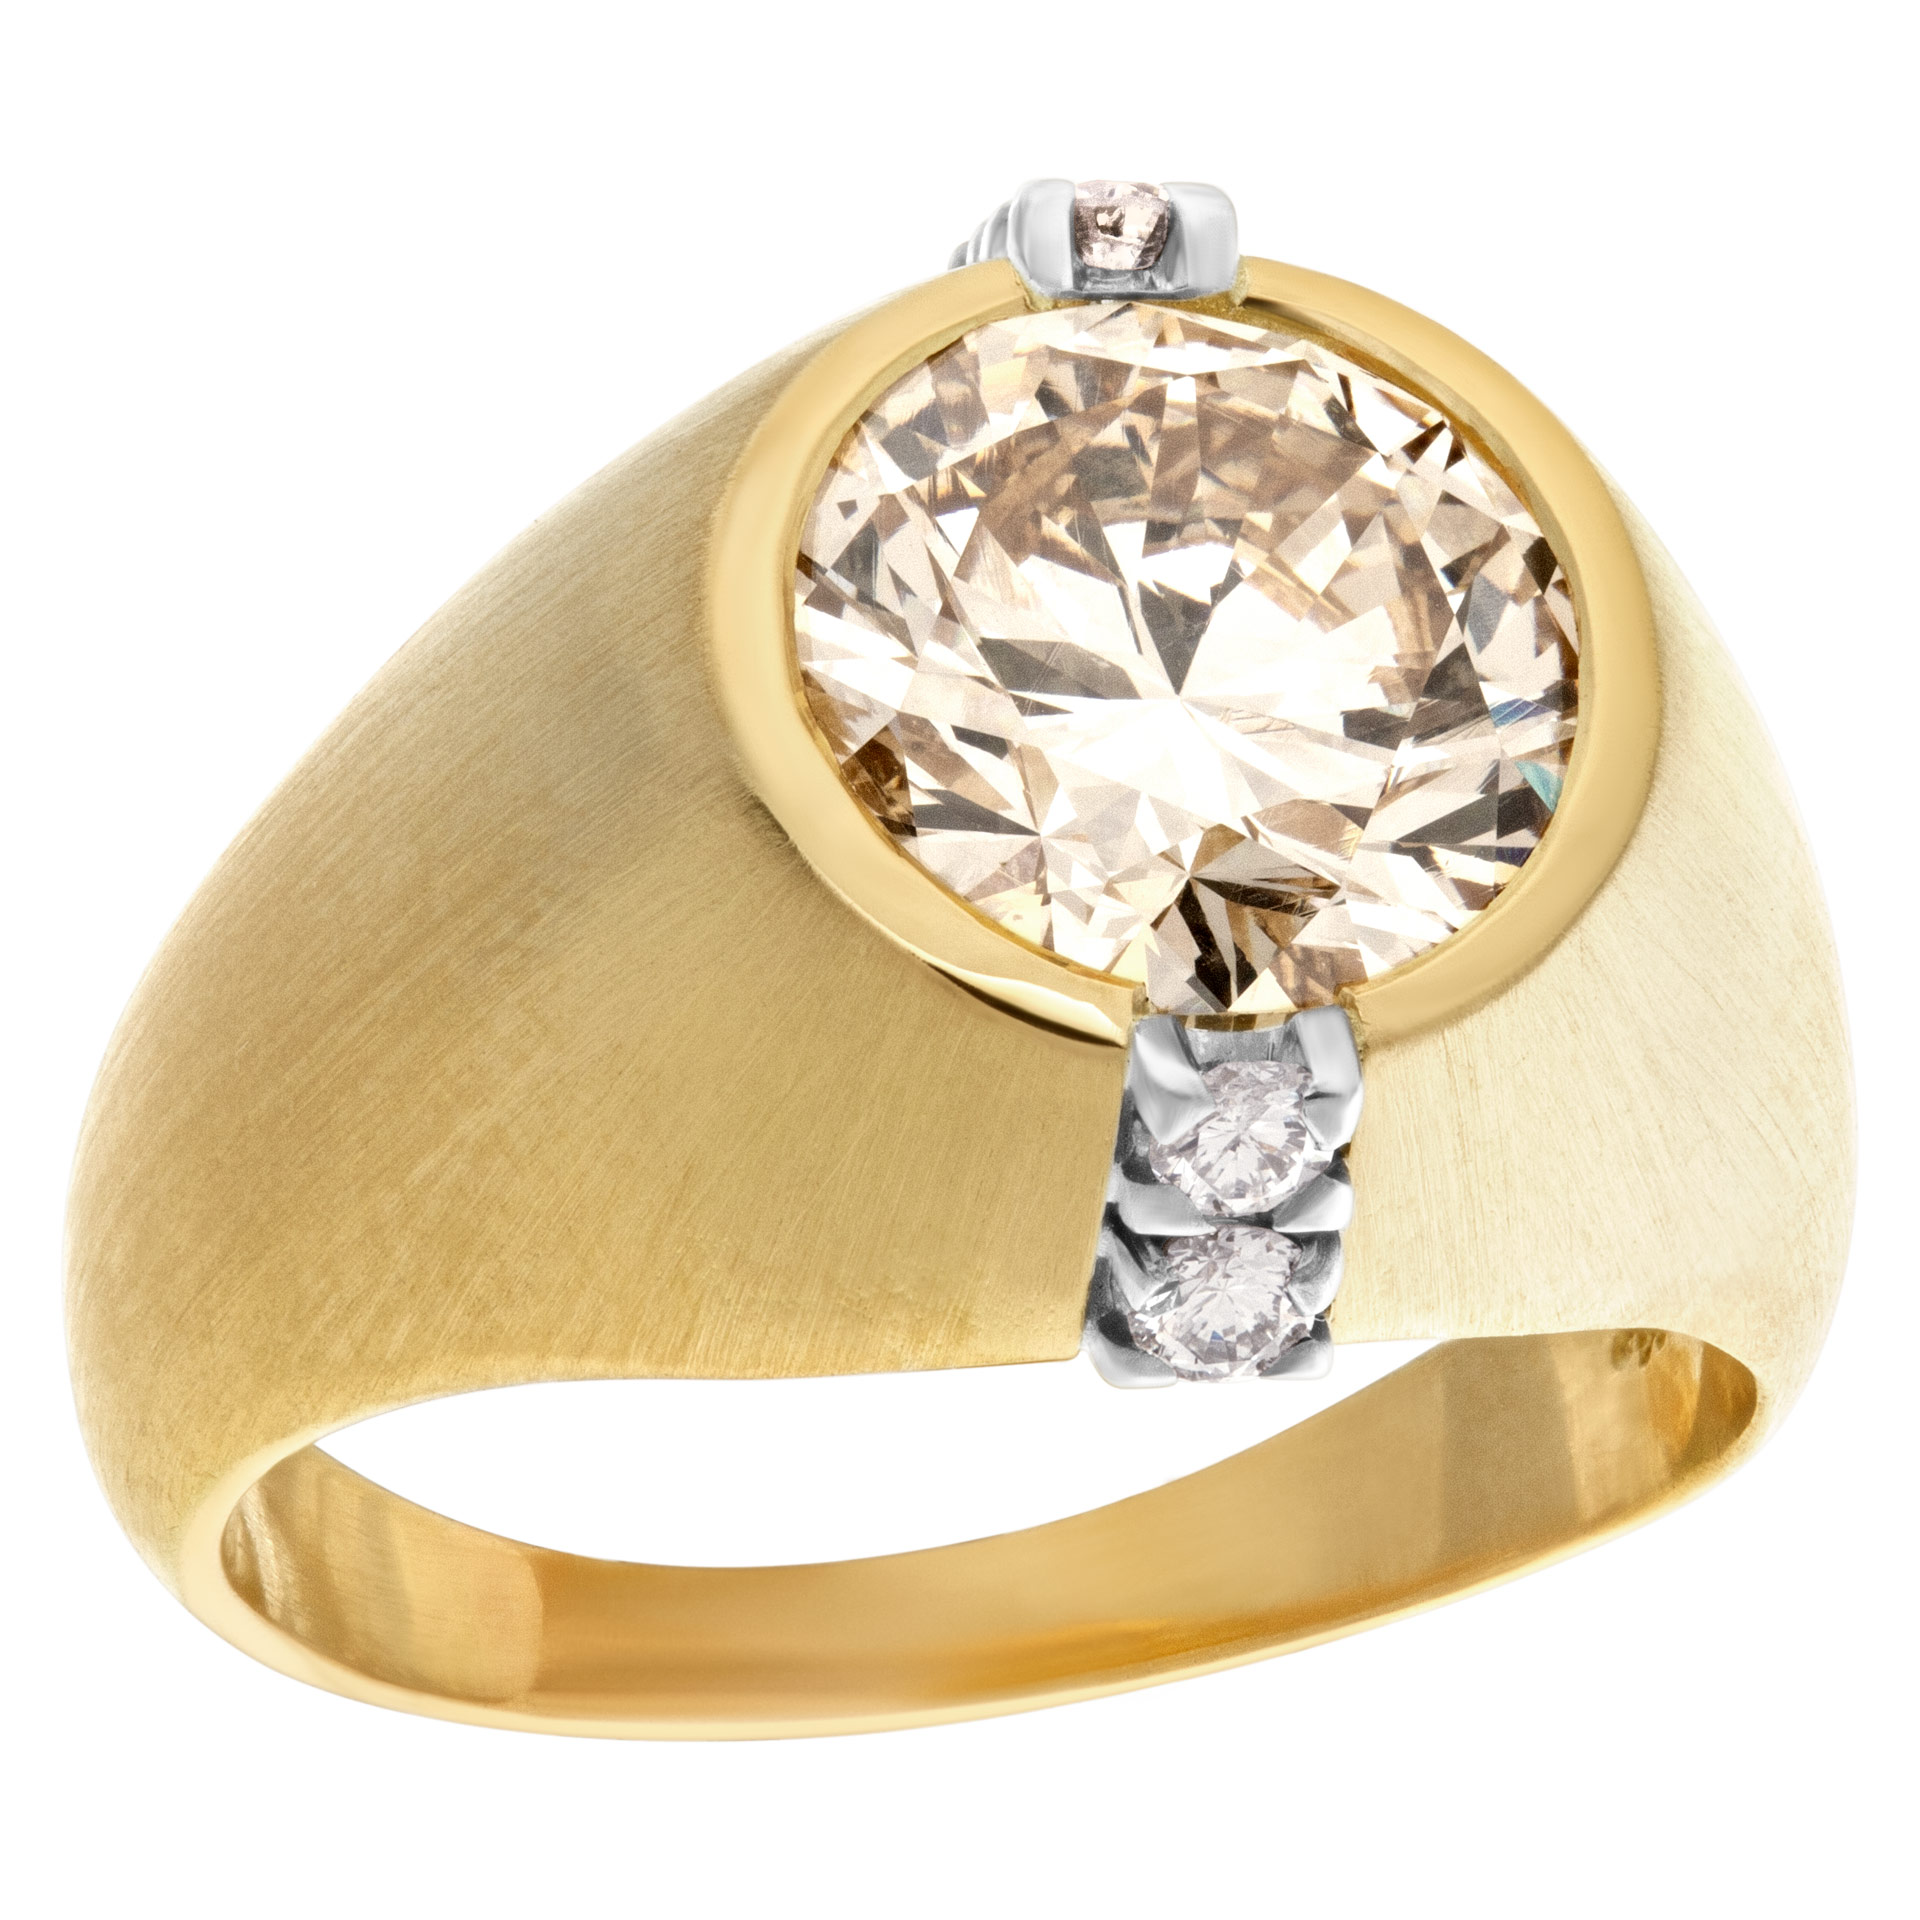 GIA Certified Kutchinsky diamond ring in 18k yellow gold. Warm and bright 4.23 carat center diamond champgane color, VS1 clarity image 2